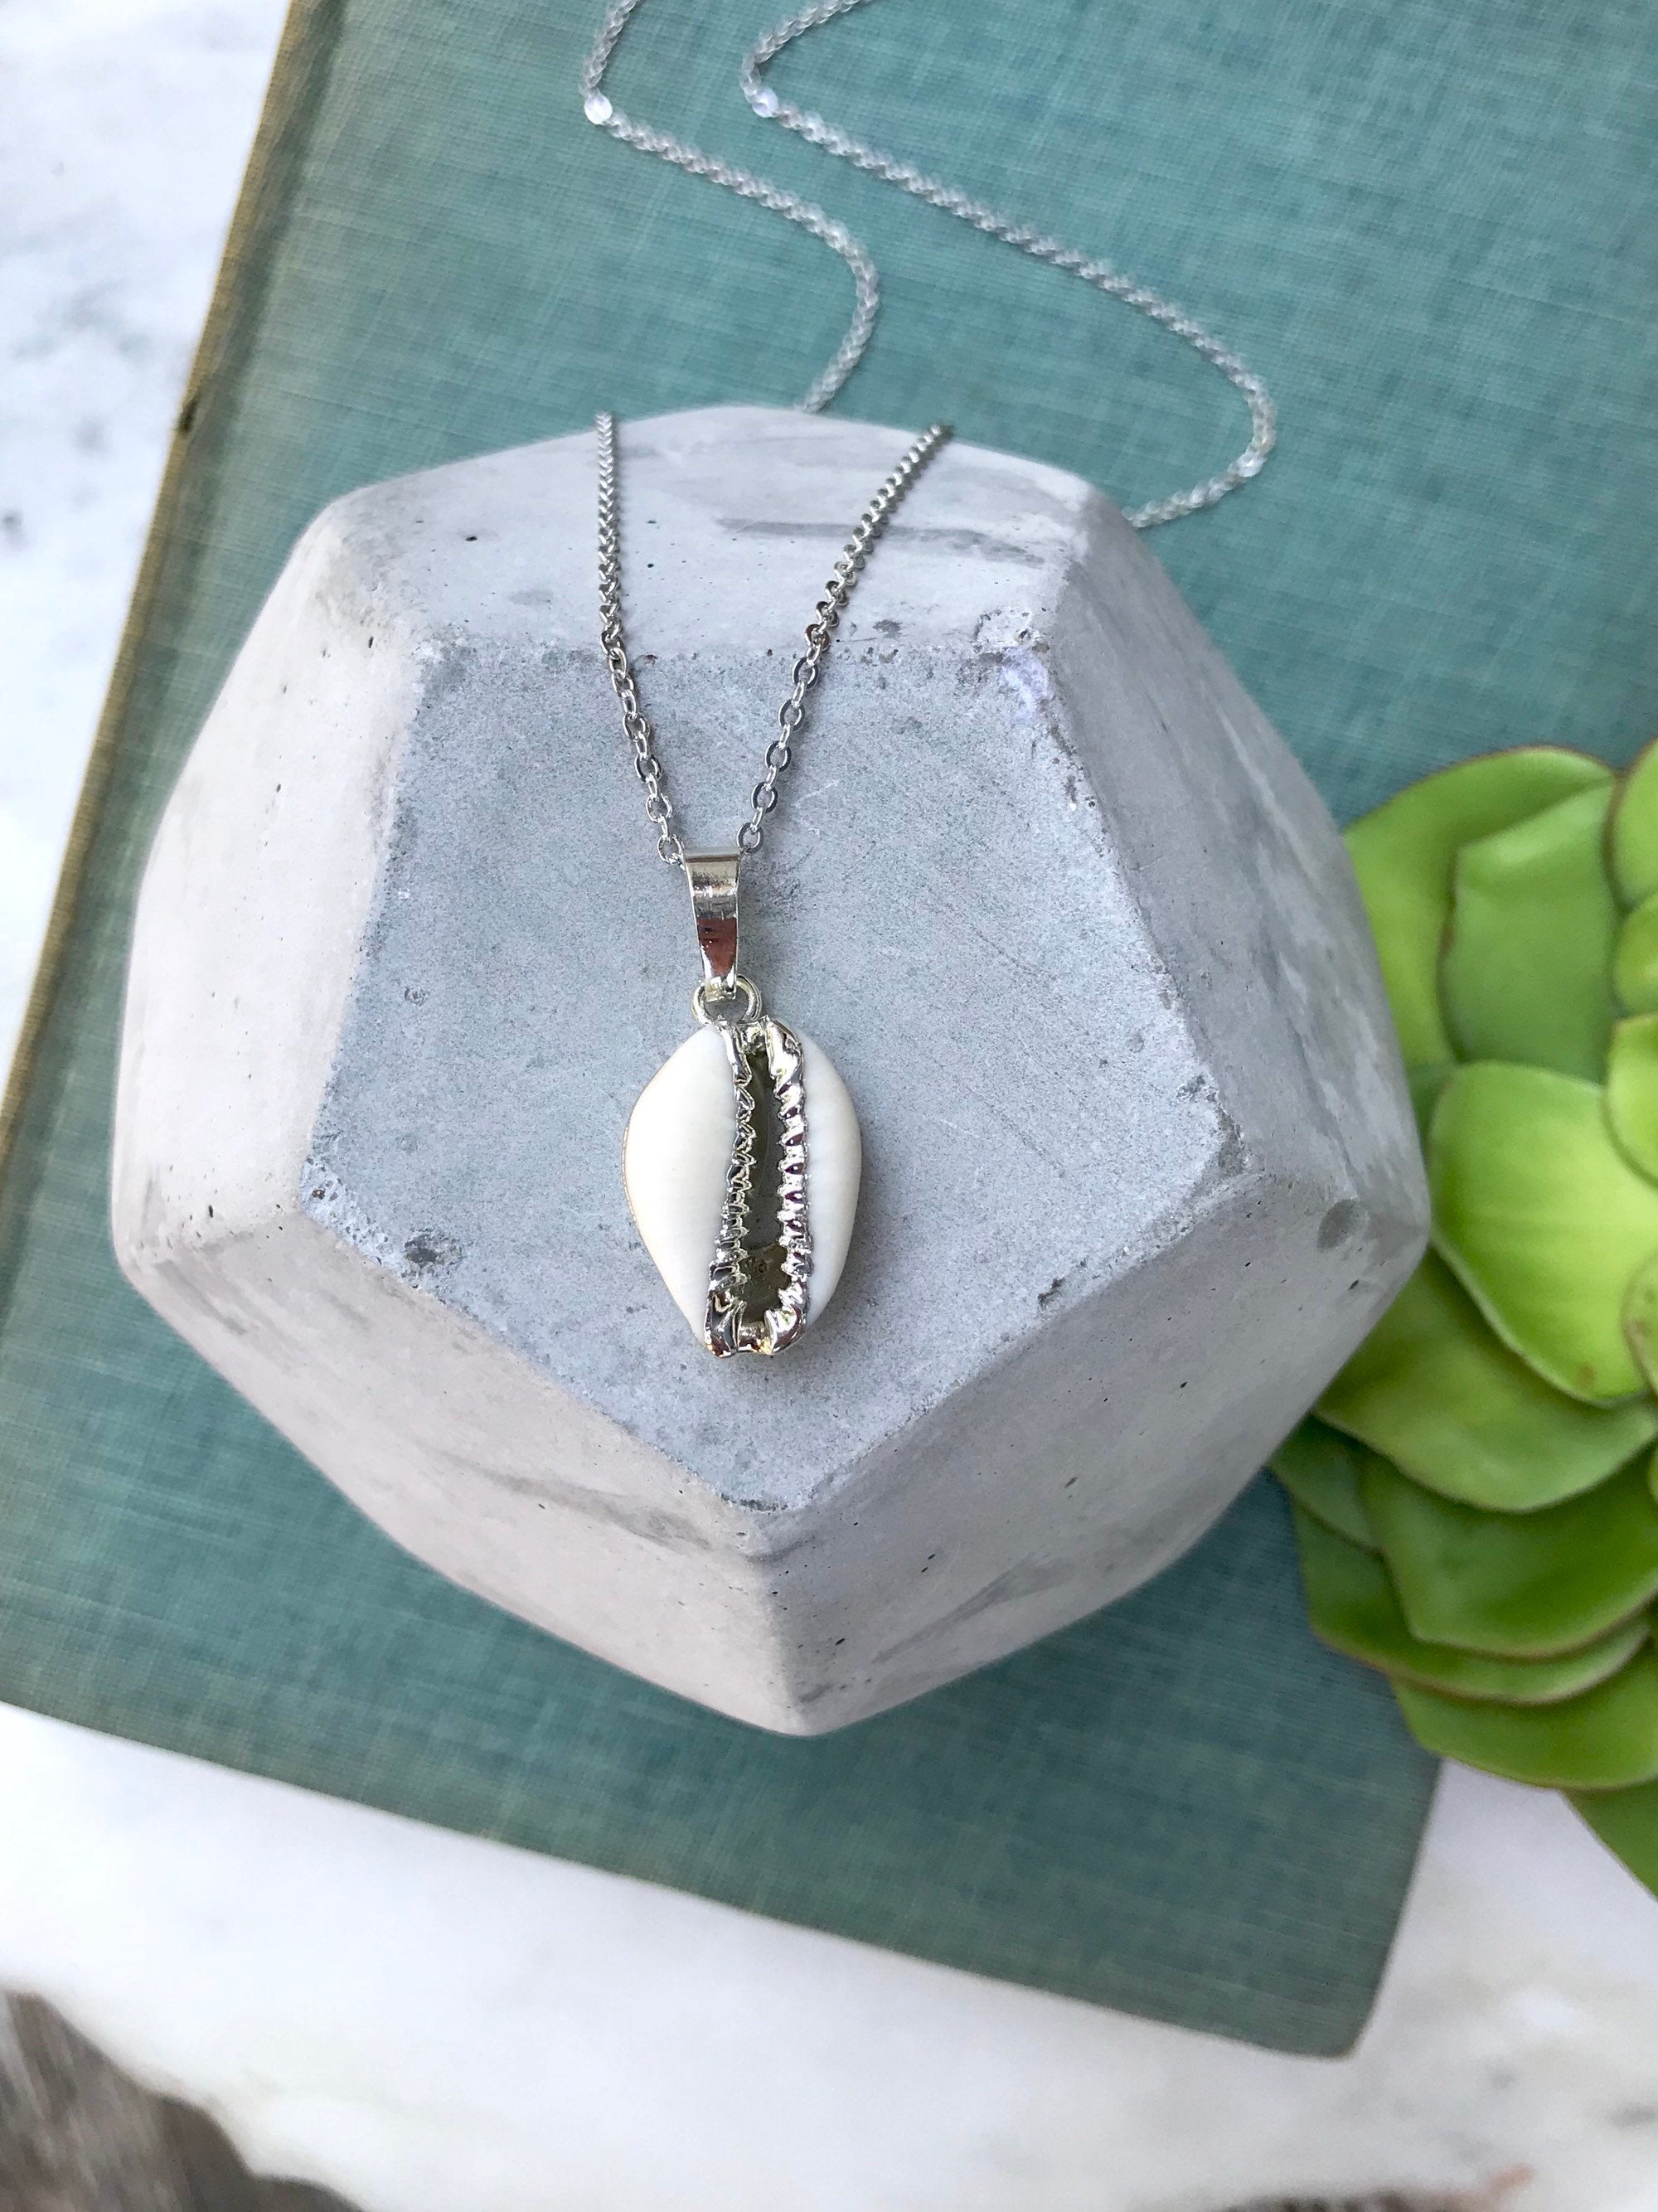 Genuine Cowrie Shell Necklace - Silver